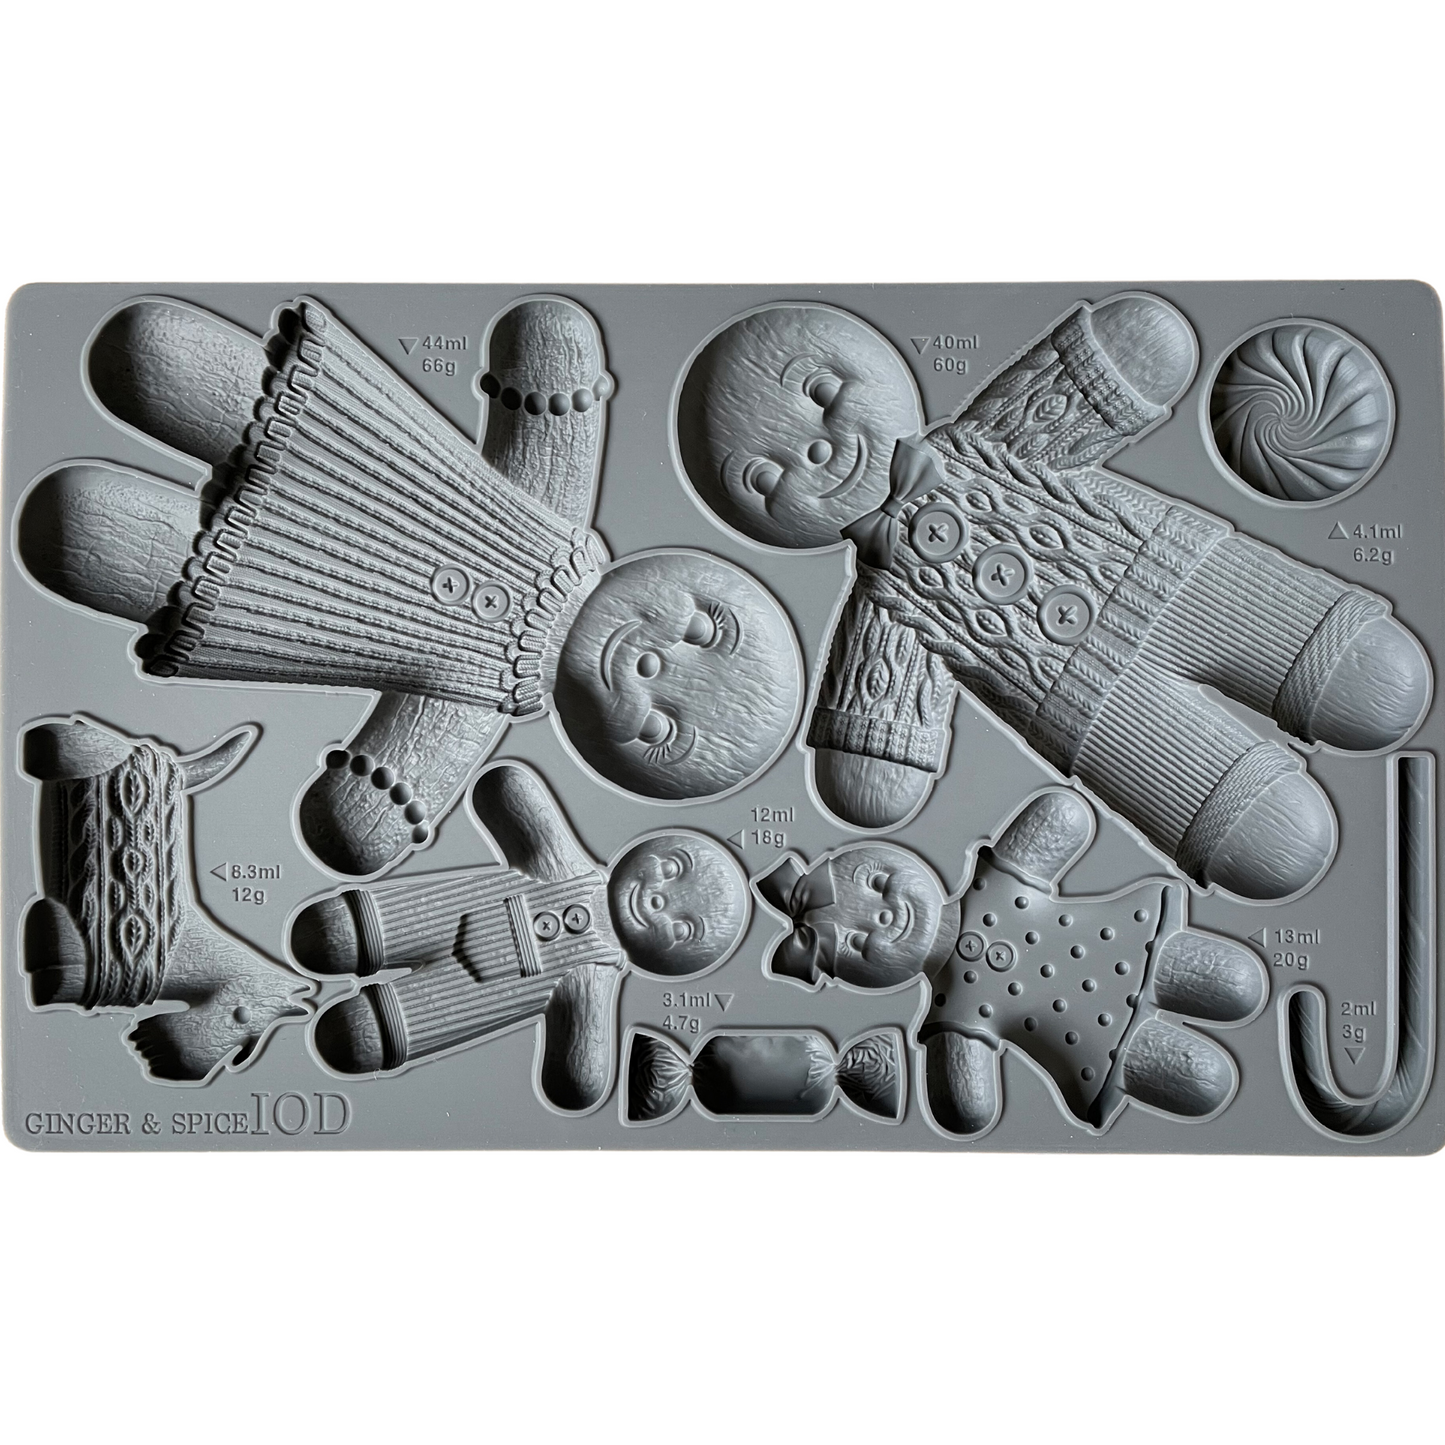 "Ginger & Spice" IOD Mould by Iron Orchid Designs. Available at Milton's Daughter.